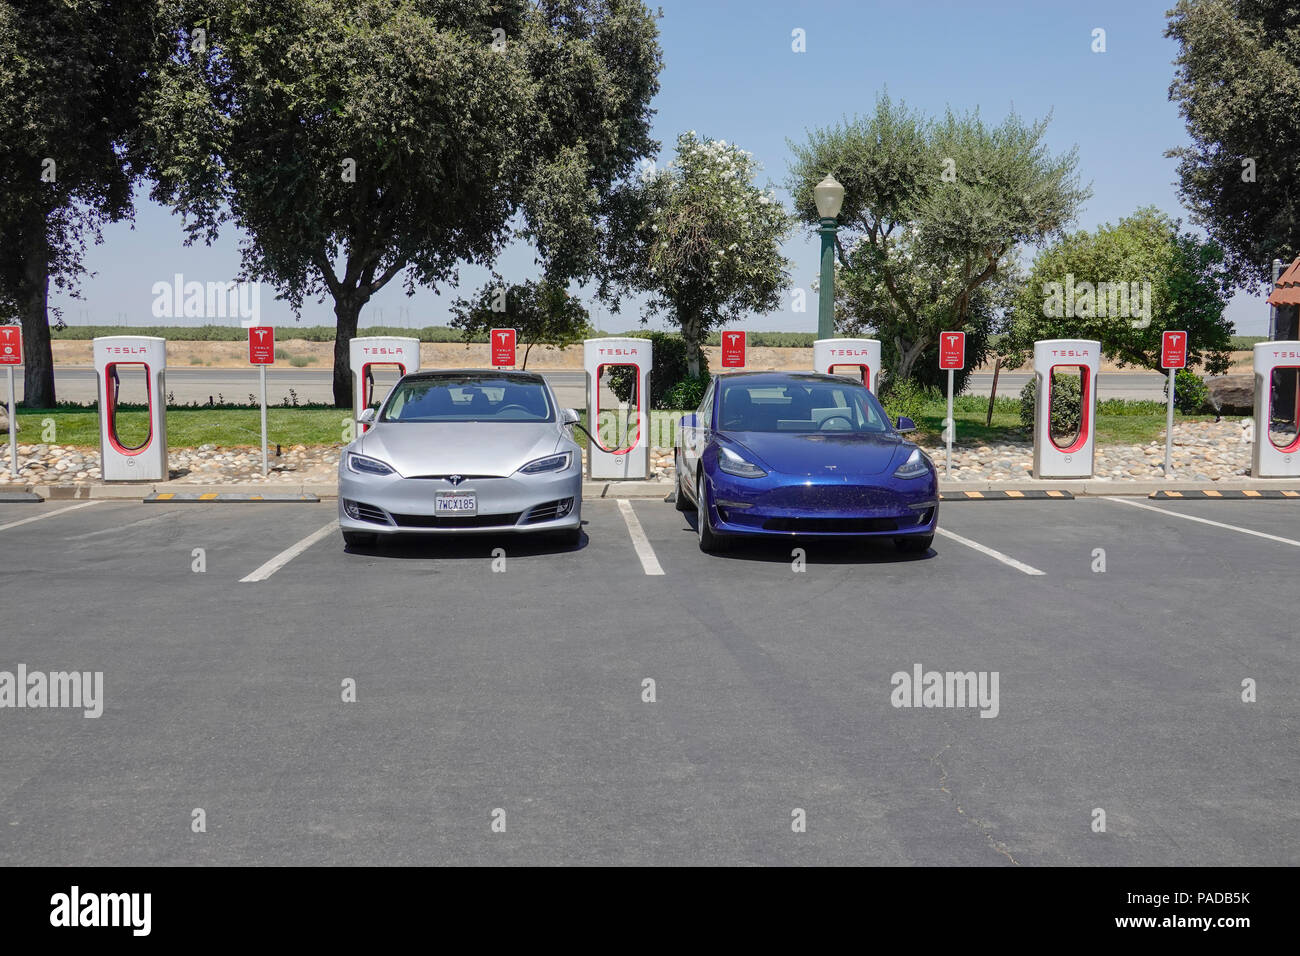 Tesla Supercharging Stations at Harris Ranch, a popular stop over on Interstate 5 in California's Central Valley. Stock Photo